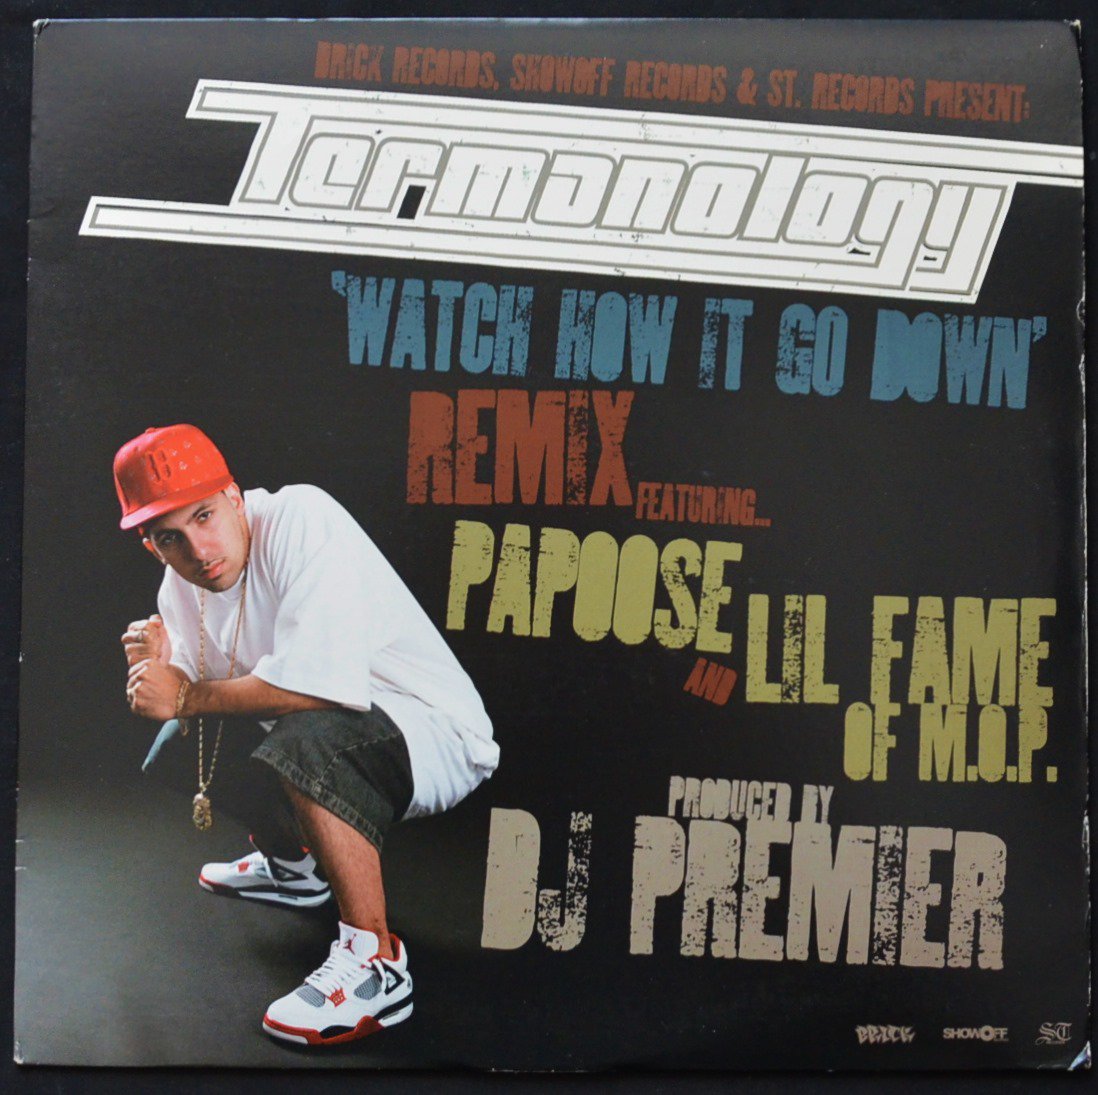 TERMANOLOGY FT.PAPOOSE & LIL FAME / WATCH HOW IT GO DOWN REMIX (PROD.BY DJ PREMIER)/ FAR AWAY (12